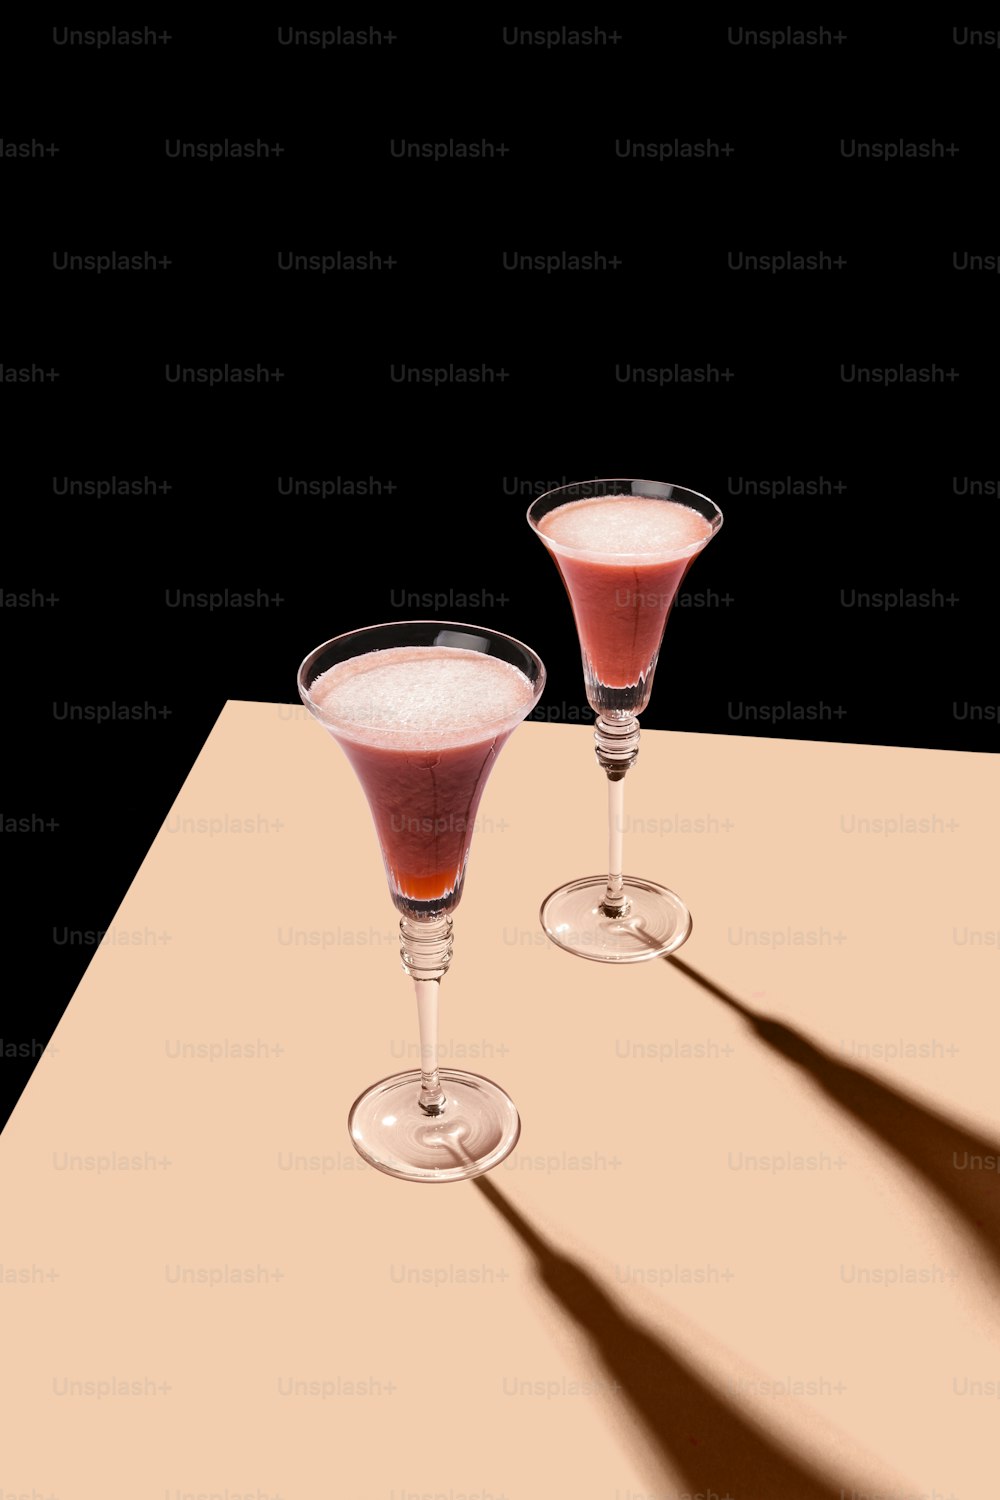 Rossini is a cocktail made with Prosecco or Champagne and strawberry puree; pop contemporary style photography